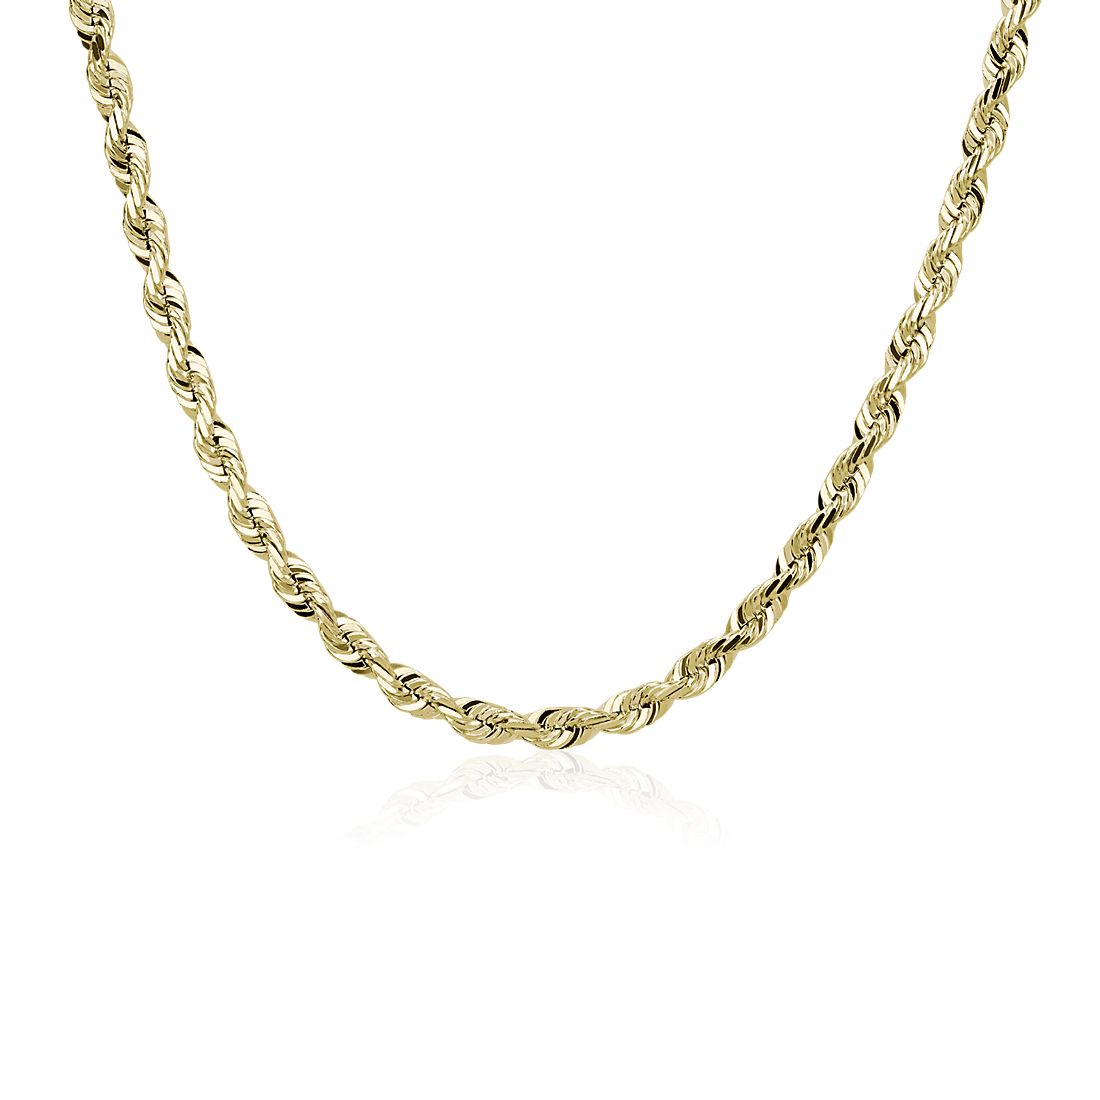 22" Men's Solid Diamond Cut Rope Chain in 14k Yellow Gold (5.5 mm)